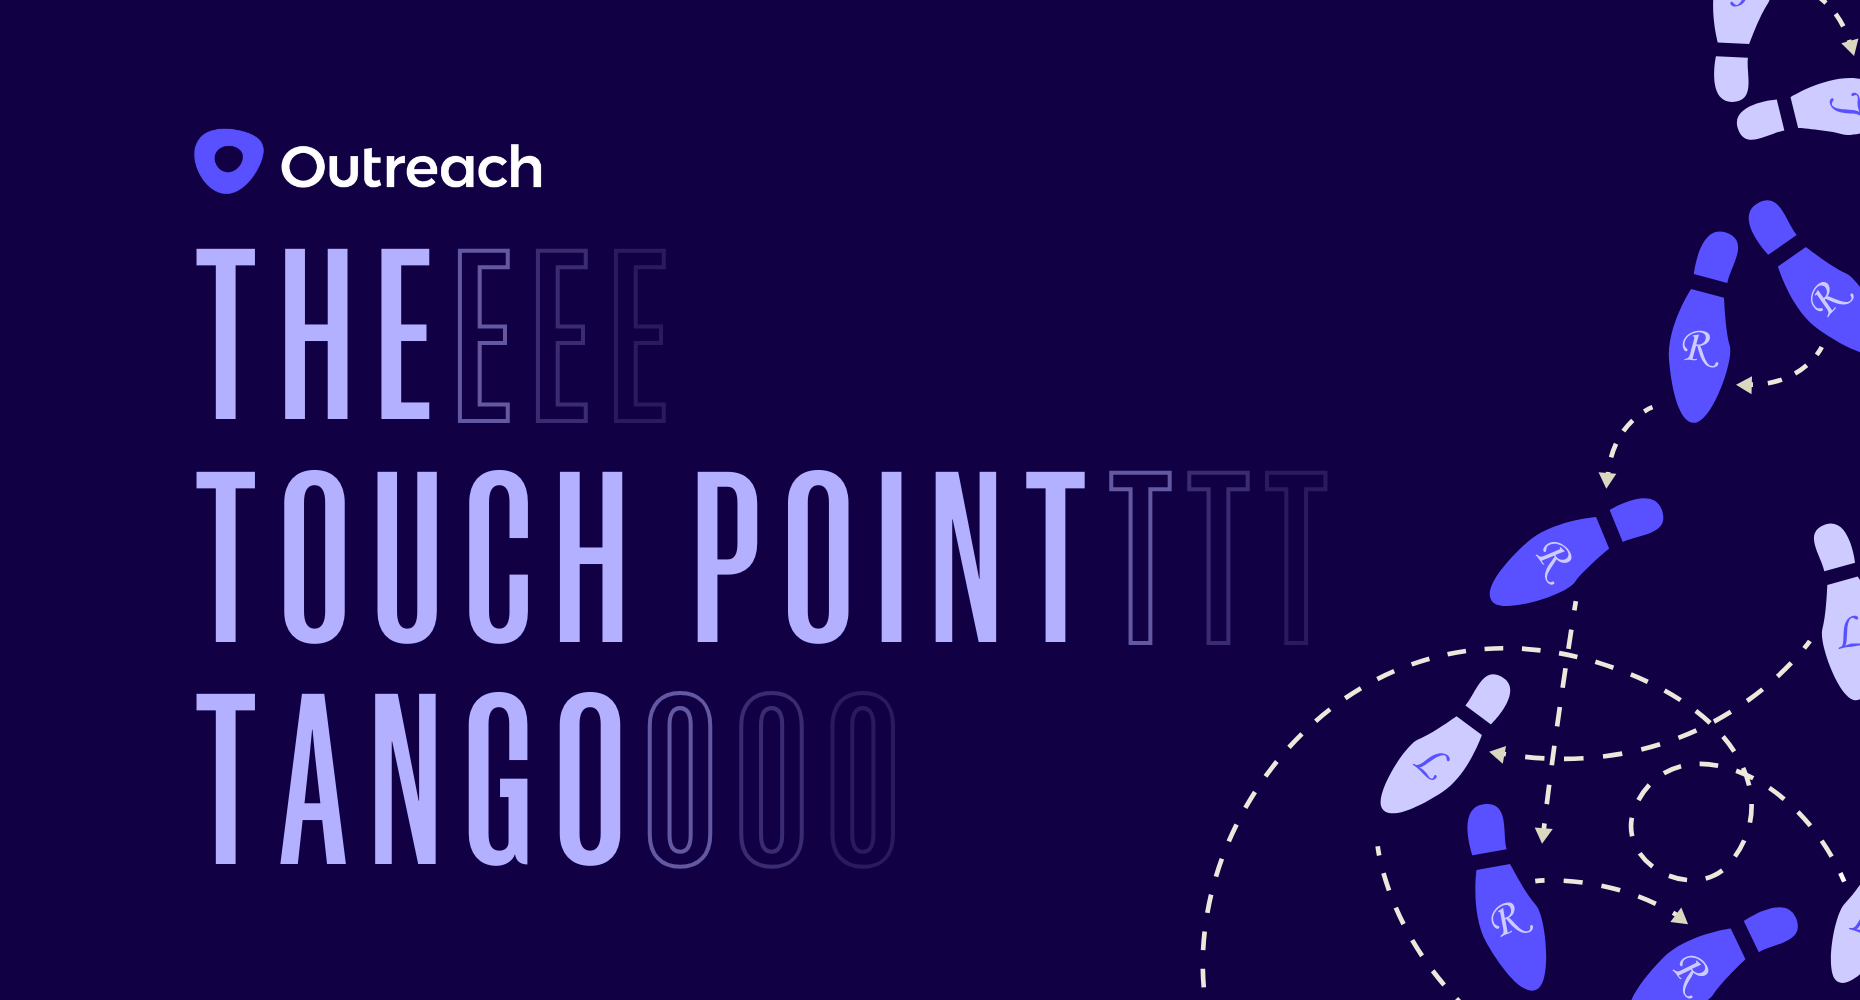 Touchpoint tango: A sales cycle analysis